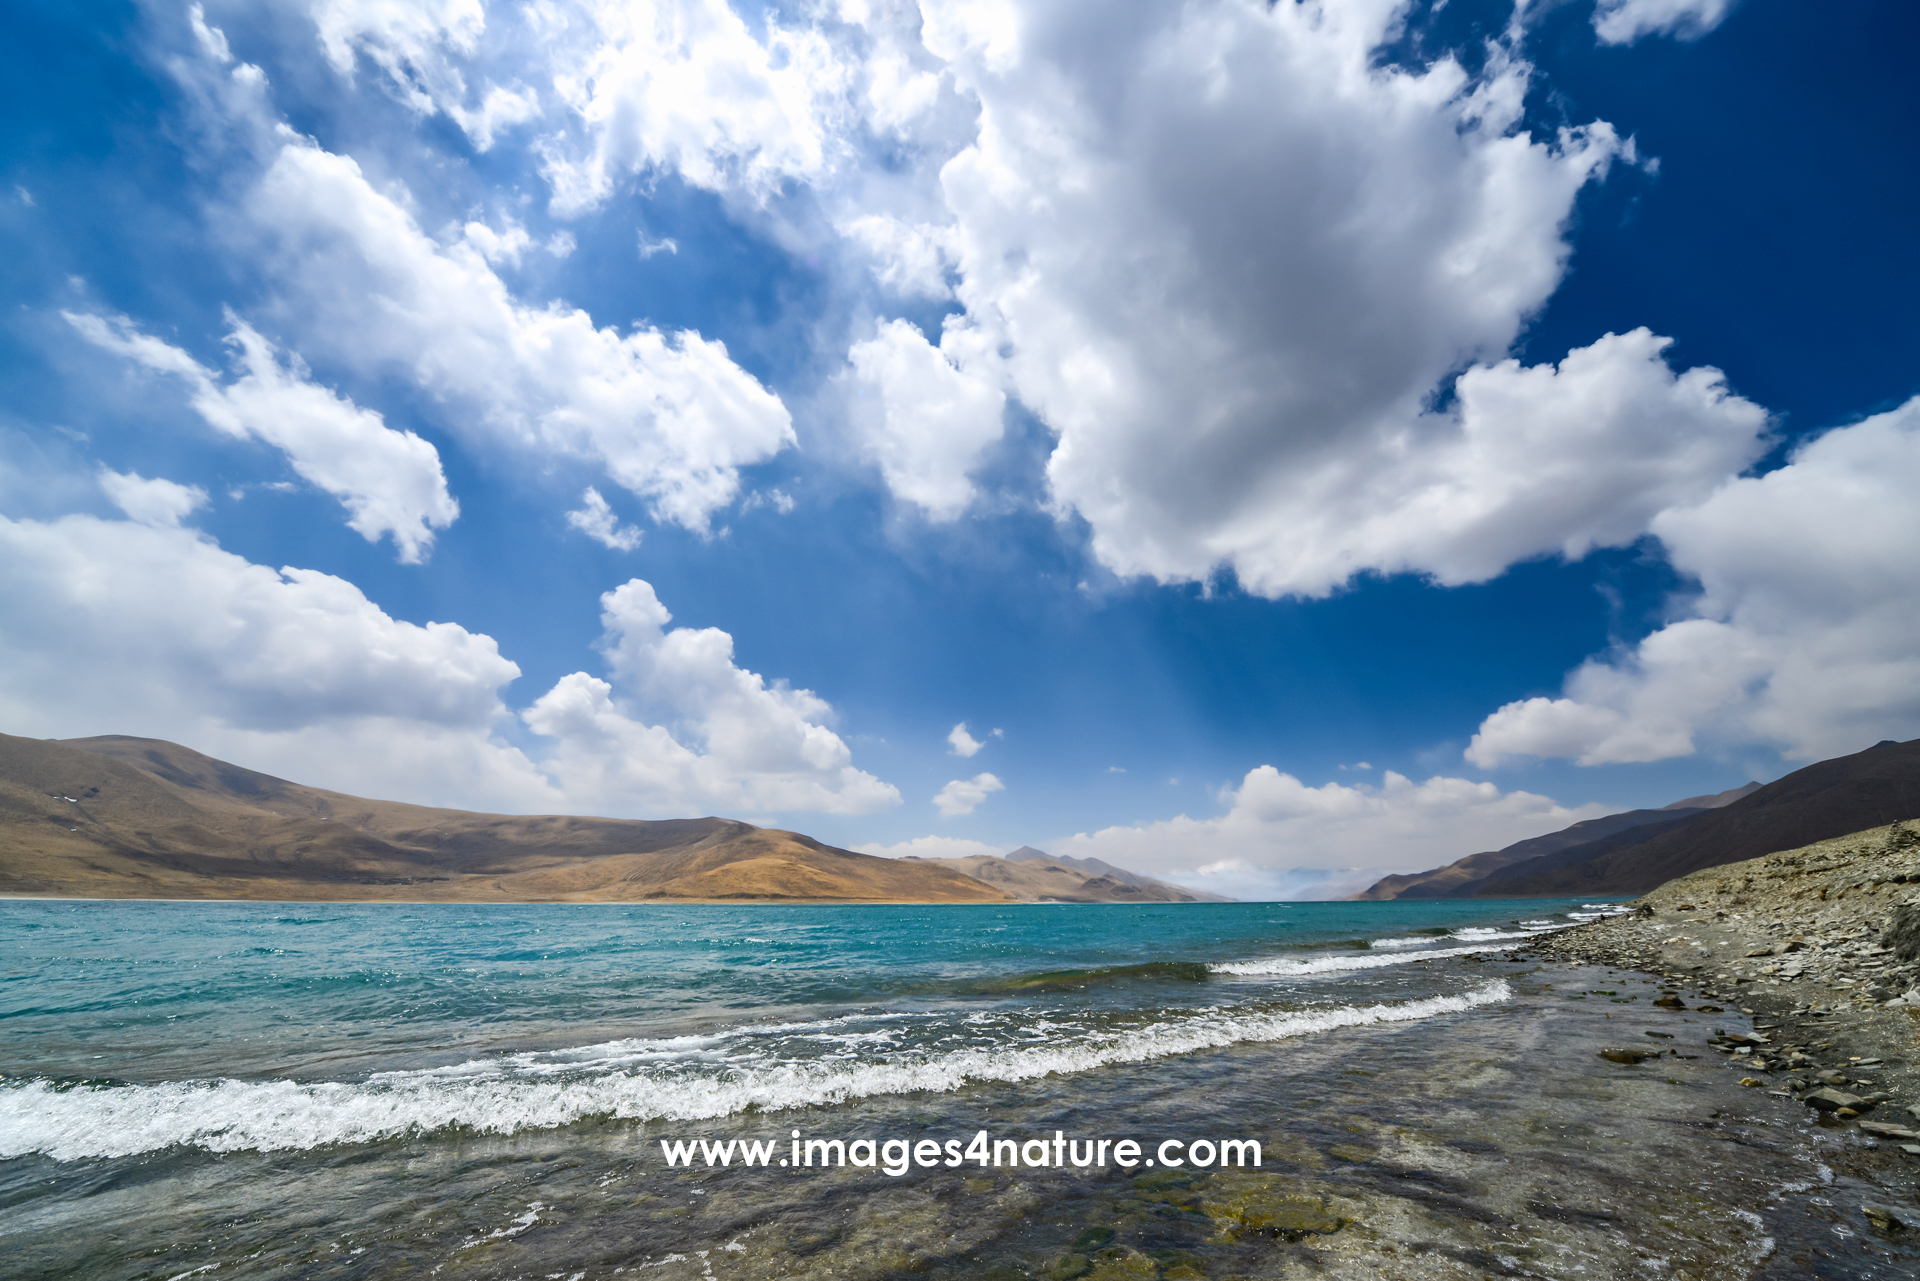 Rocky beach with waves of the Yamzho Yumco lake against blue sky with large white clouds